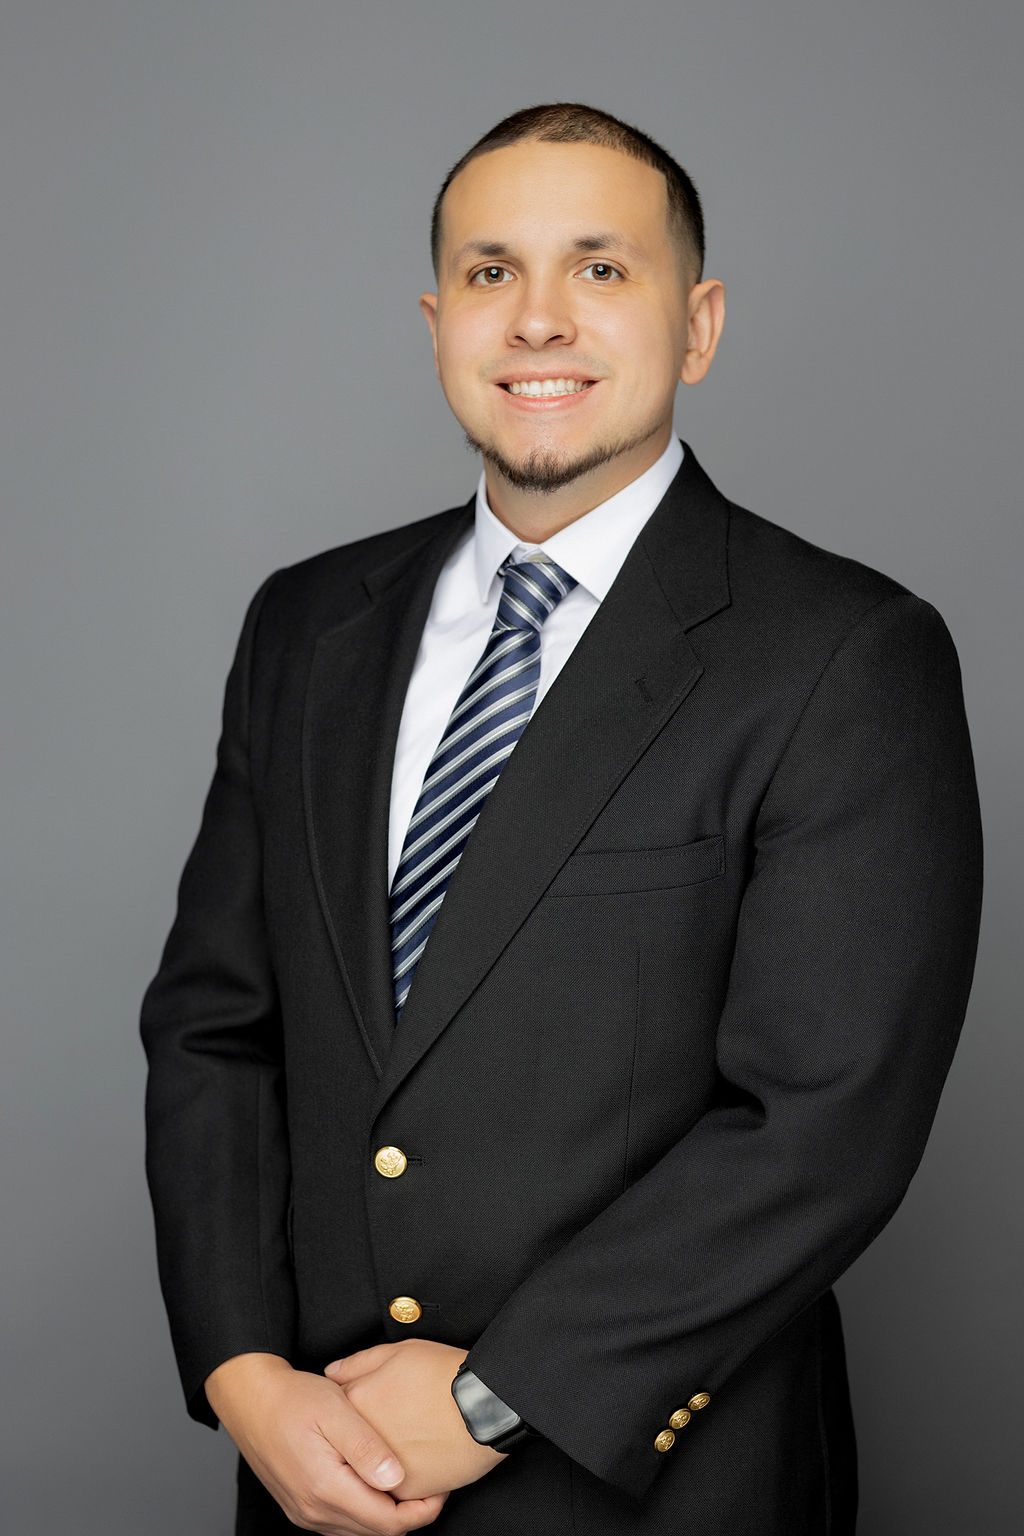 This photo is a professional headshot of Ricardo Quezada. He is a Latine man with a very short black buzzcut and beard. He is wearing a white button-up with a black blazer buttoned on top of it. He has on a black and silver striped tie. He is also wearing a black smartwatch on his wrist. He is smiling and has his arms relaxed at his sides with his hands clasped in front of his waist.